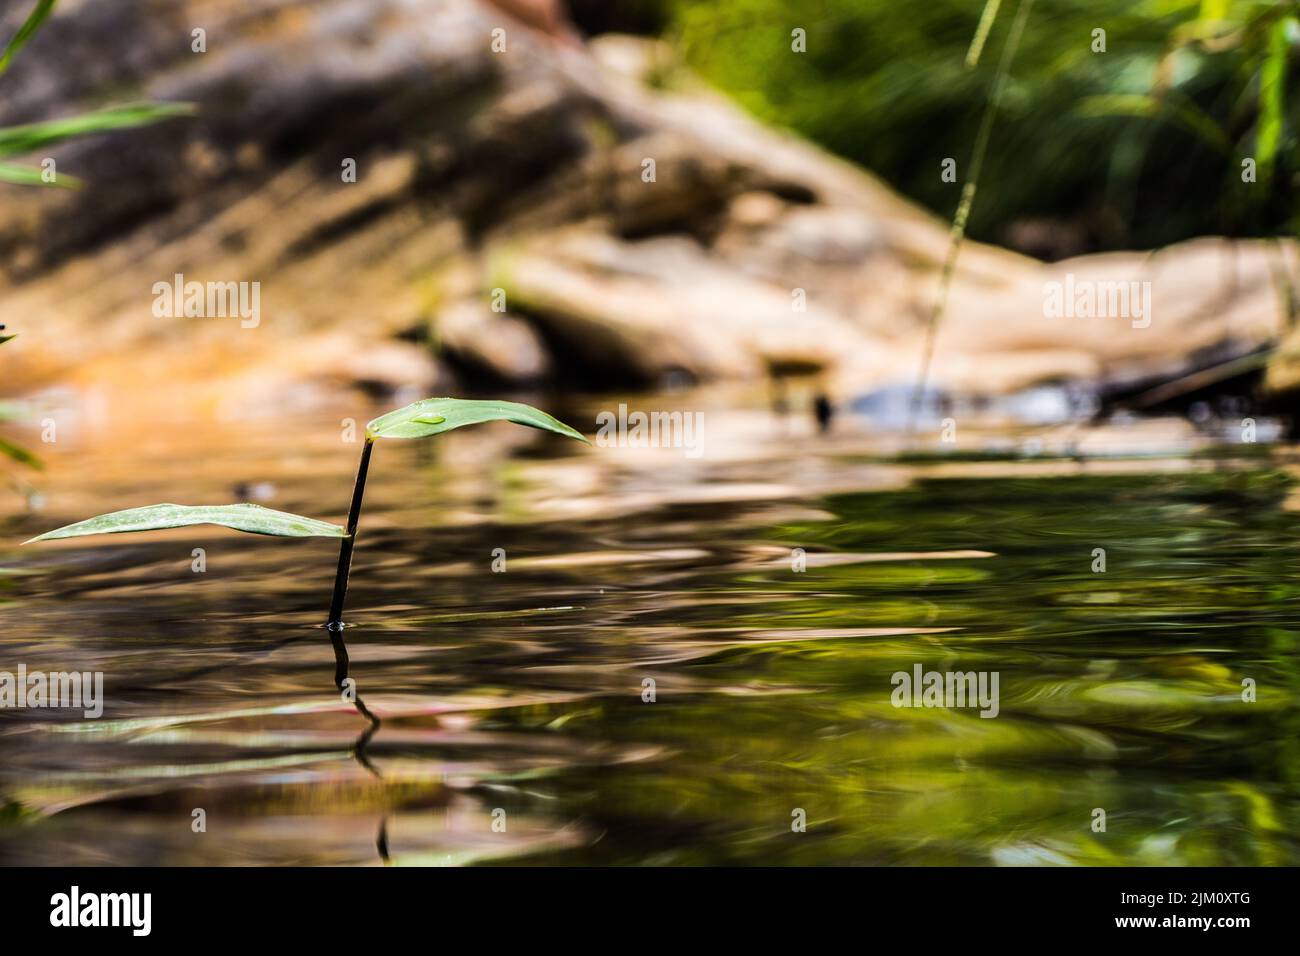 A closeup shot of a plant growing in the river among rocks Stock Photo